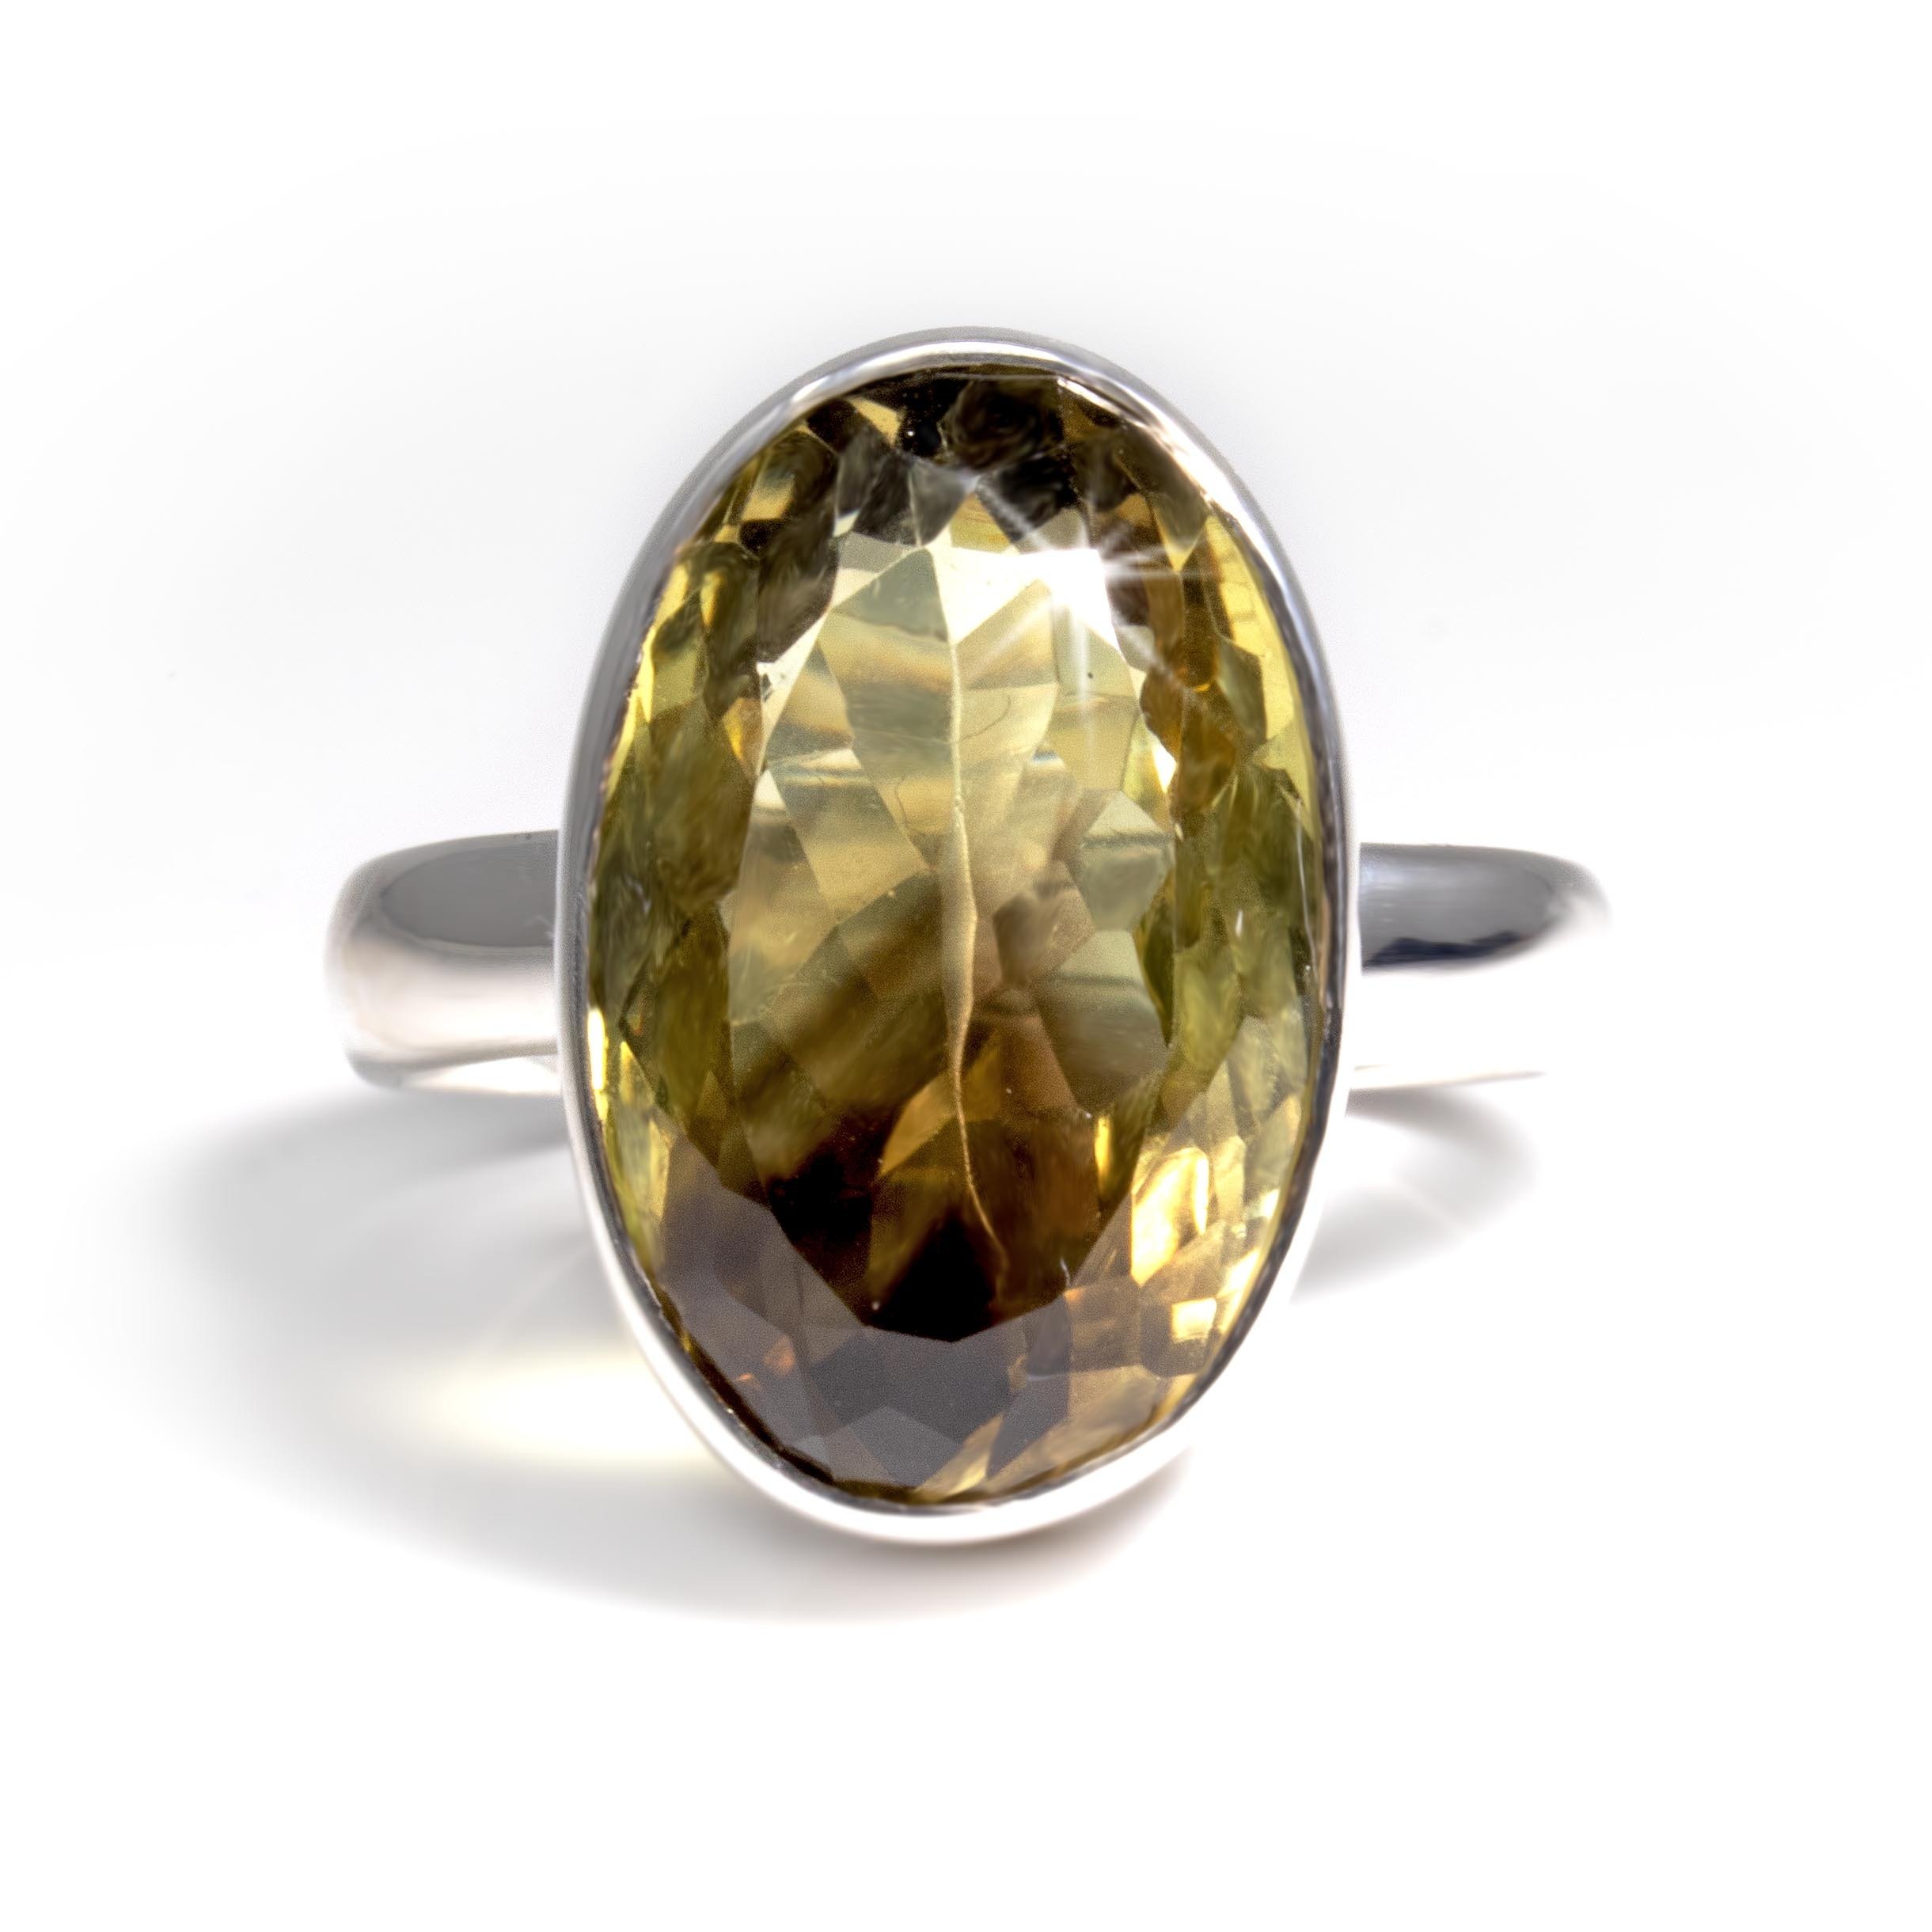 Lemon Quartz Ring Size 10 - Faceted Oval With Simple Silver Bezel & Band